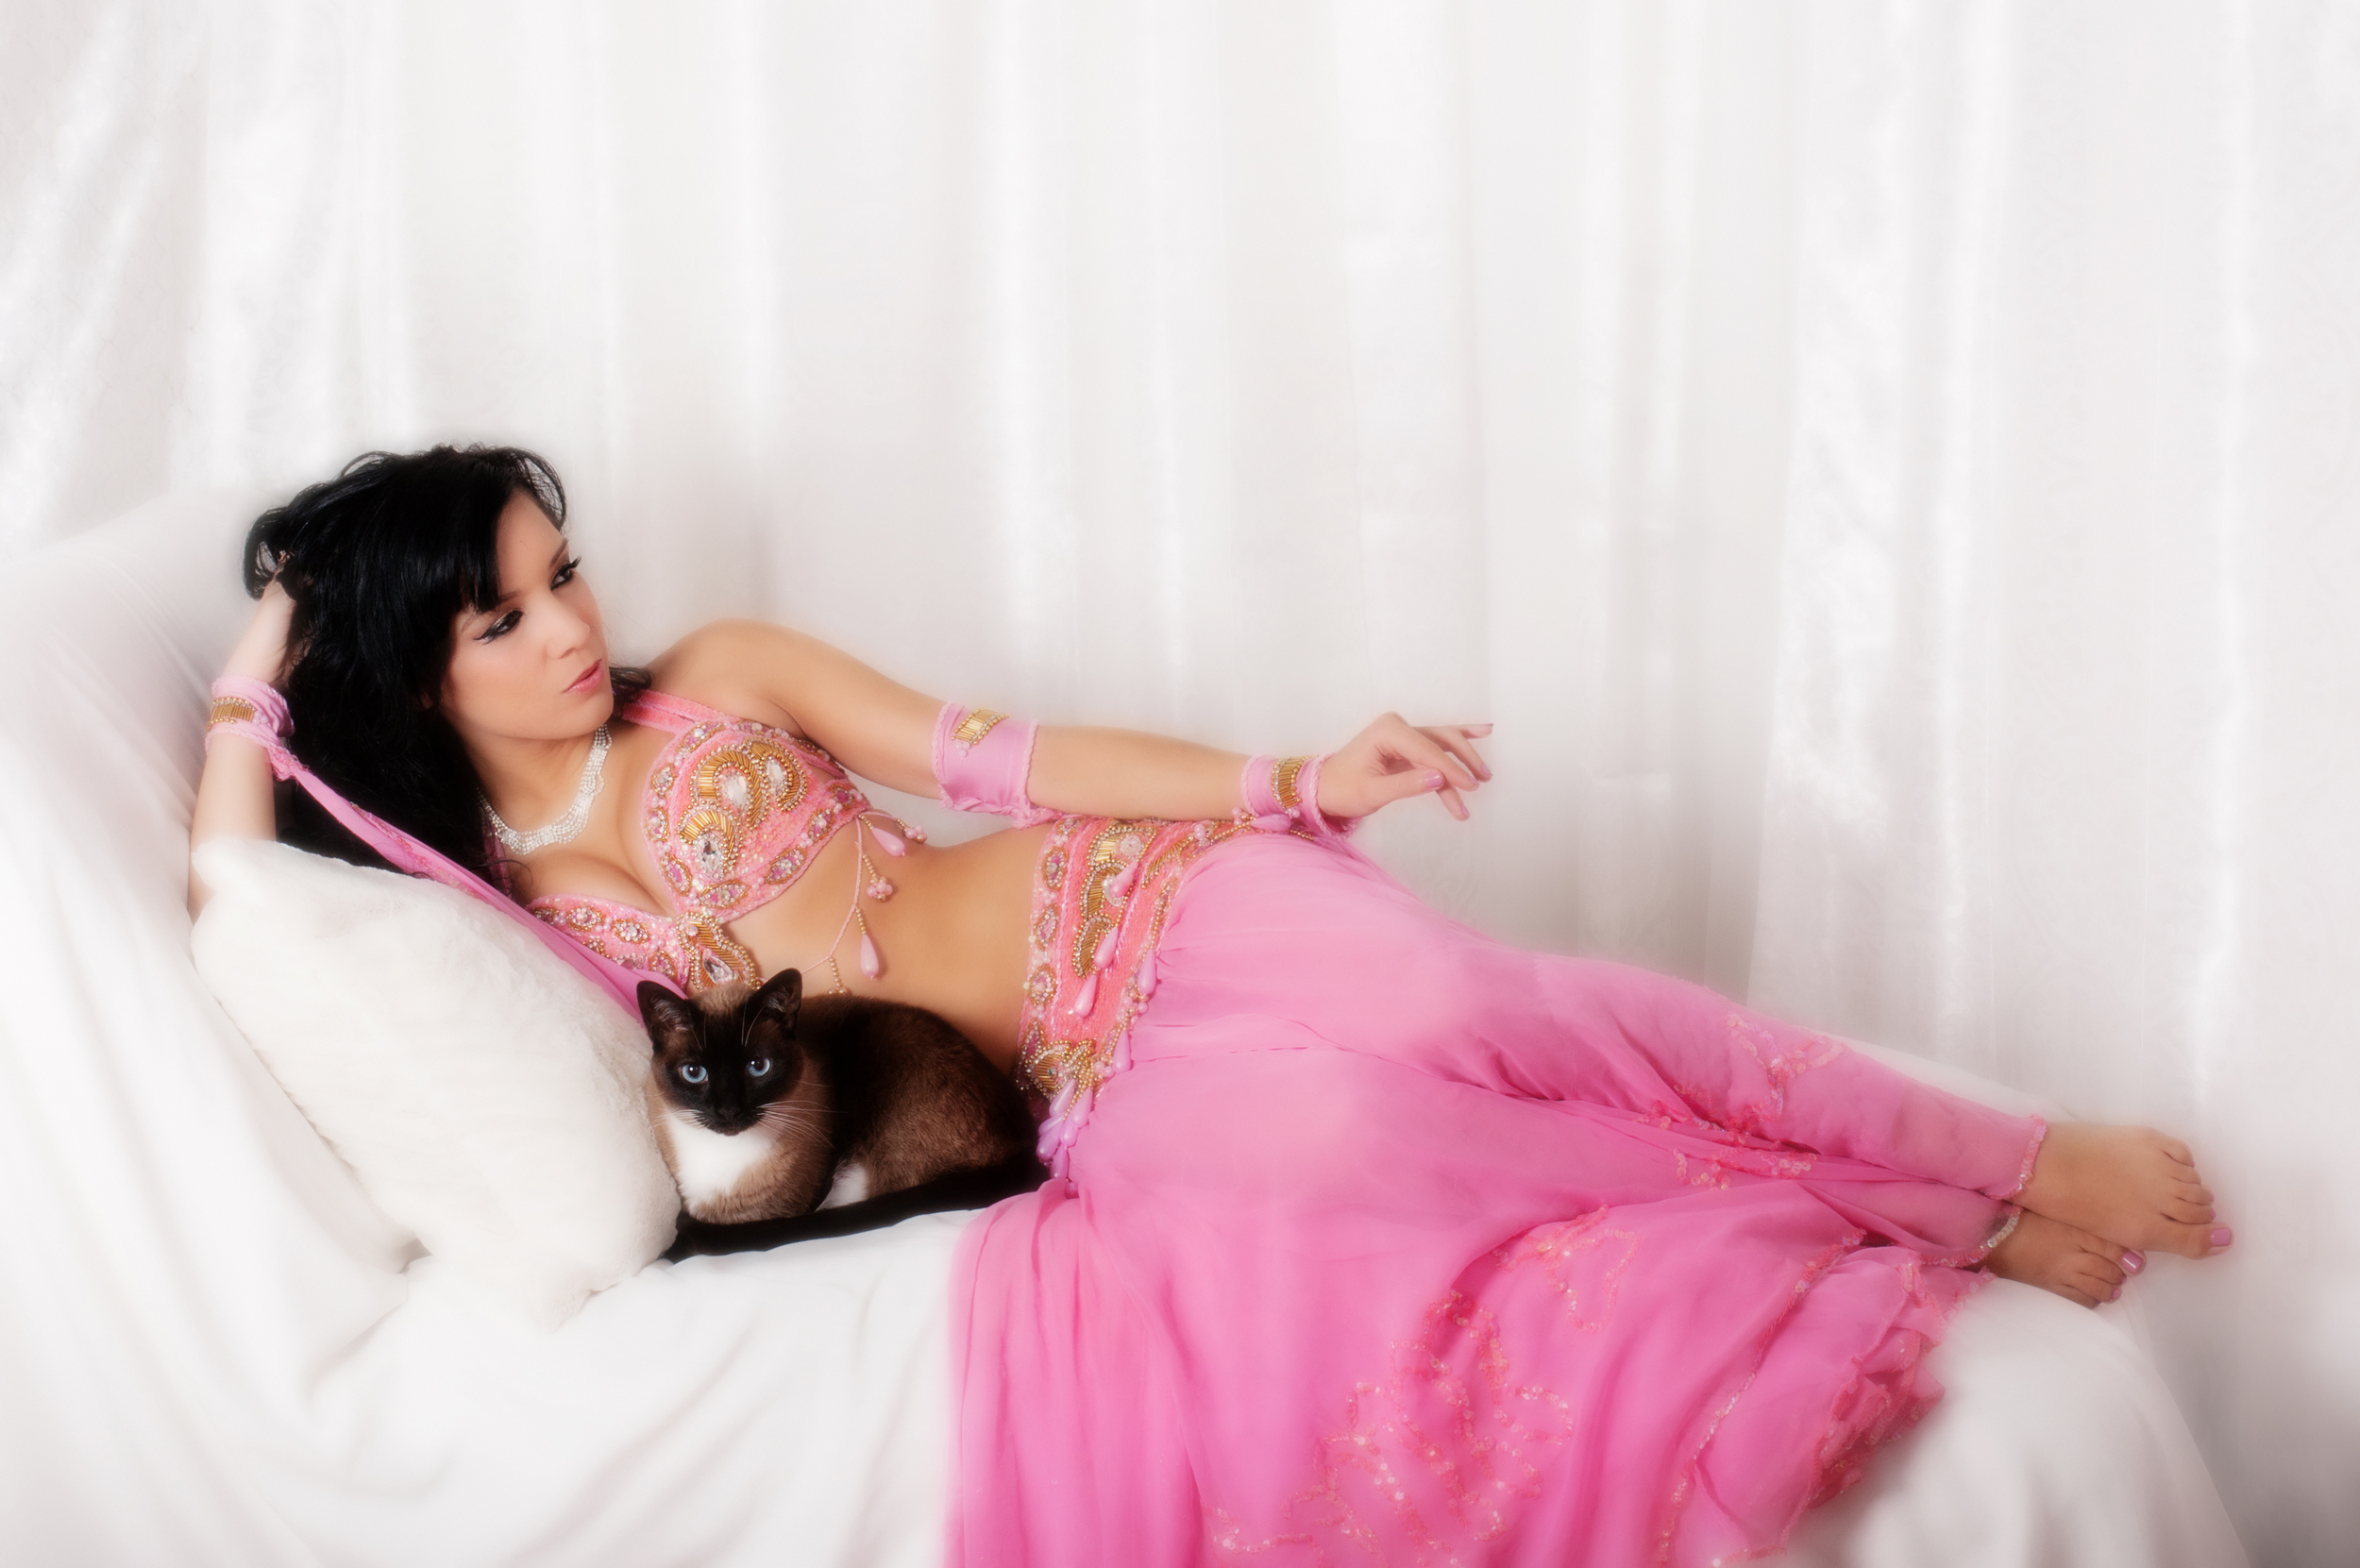  cheeky belly dancer provides belly dance, fire dance, indian, bollywood,
 Turkish and egyptain belly dance style for weddings, parties, classes 
and lessons serving jupiter palm beach gardens west palm beach palm 
beach delray beach boynton beach fo